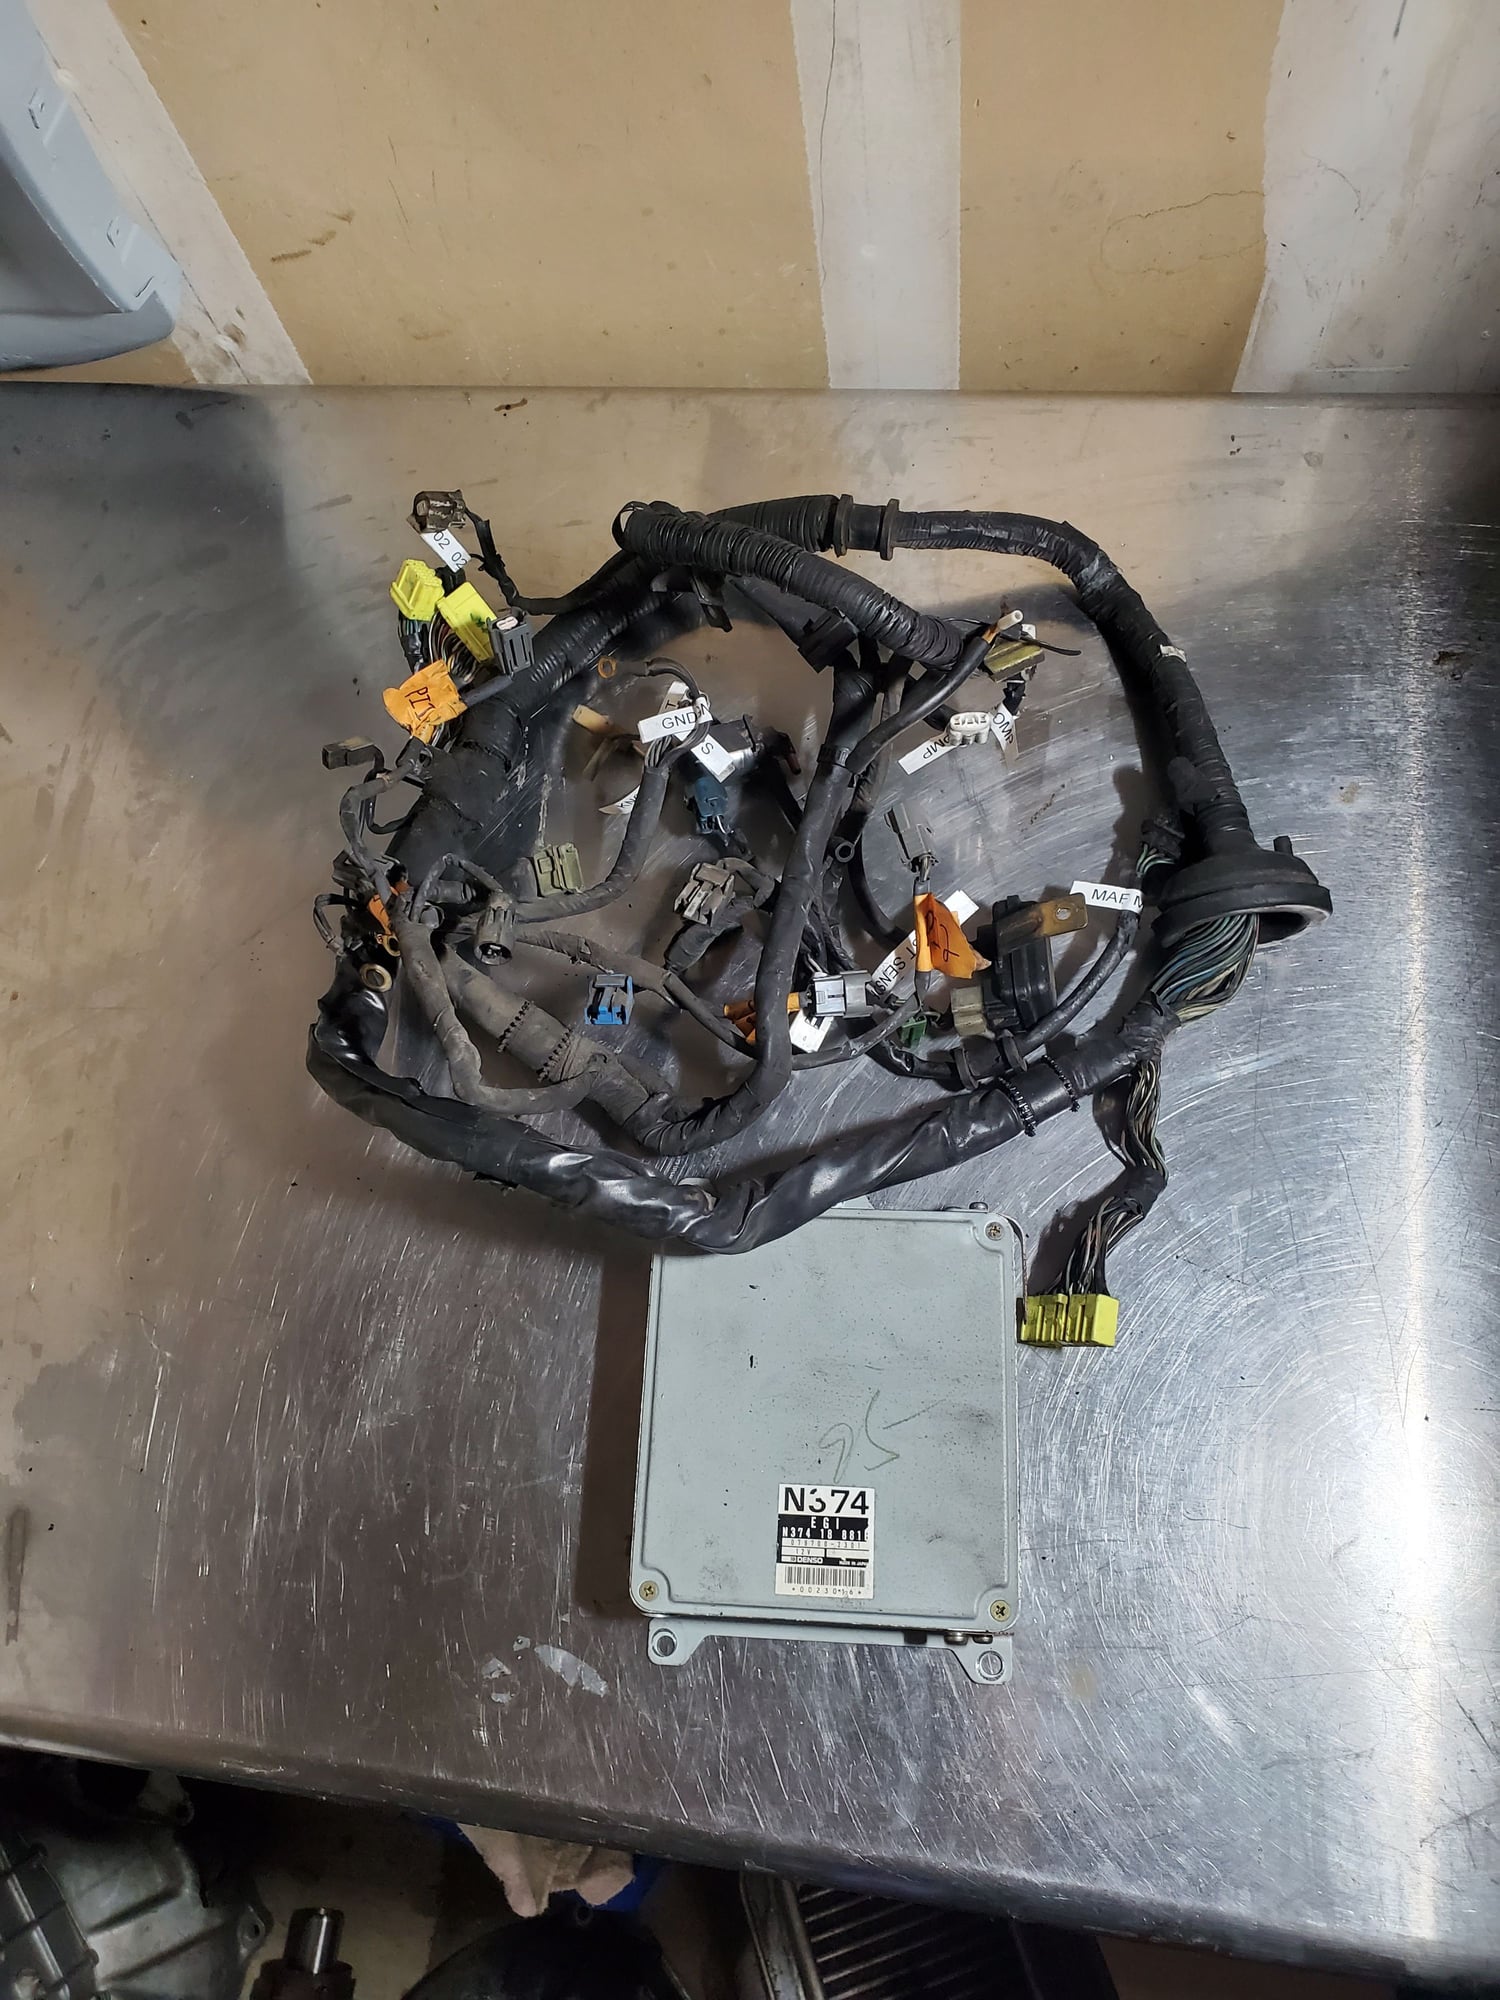 Engine - Electrical - S5 turbo engine harness and ECU - Used - 1988 to 1991 Mazda RX-7 - Fairfield, CA 94534, United States